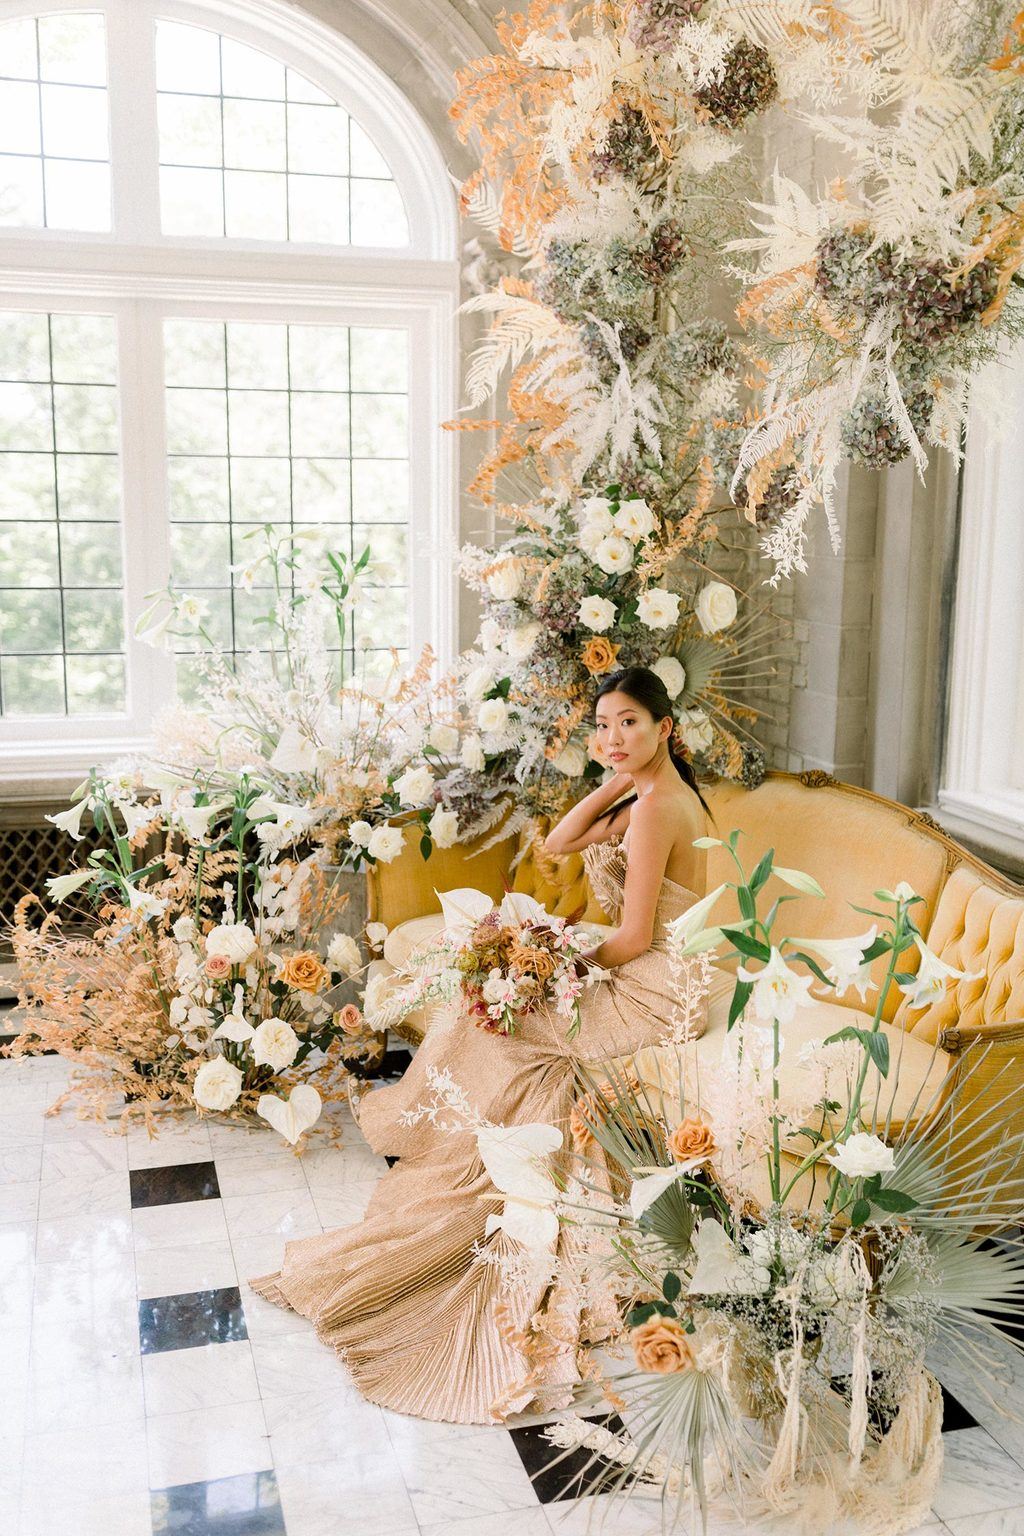 Styled Social Indiana: Autumnal Wedding Inspiration With Frills In